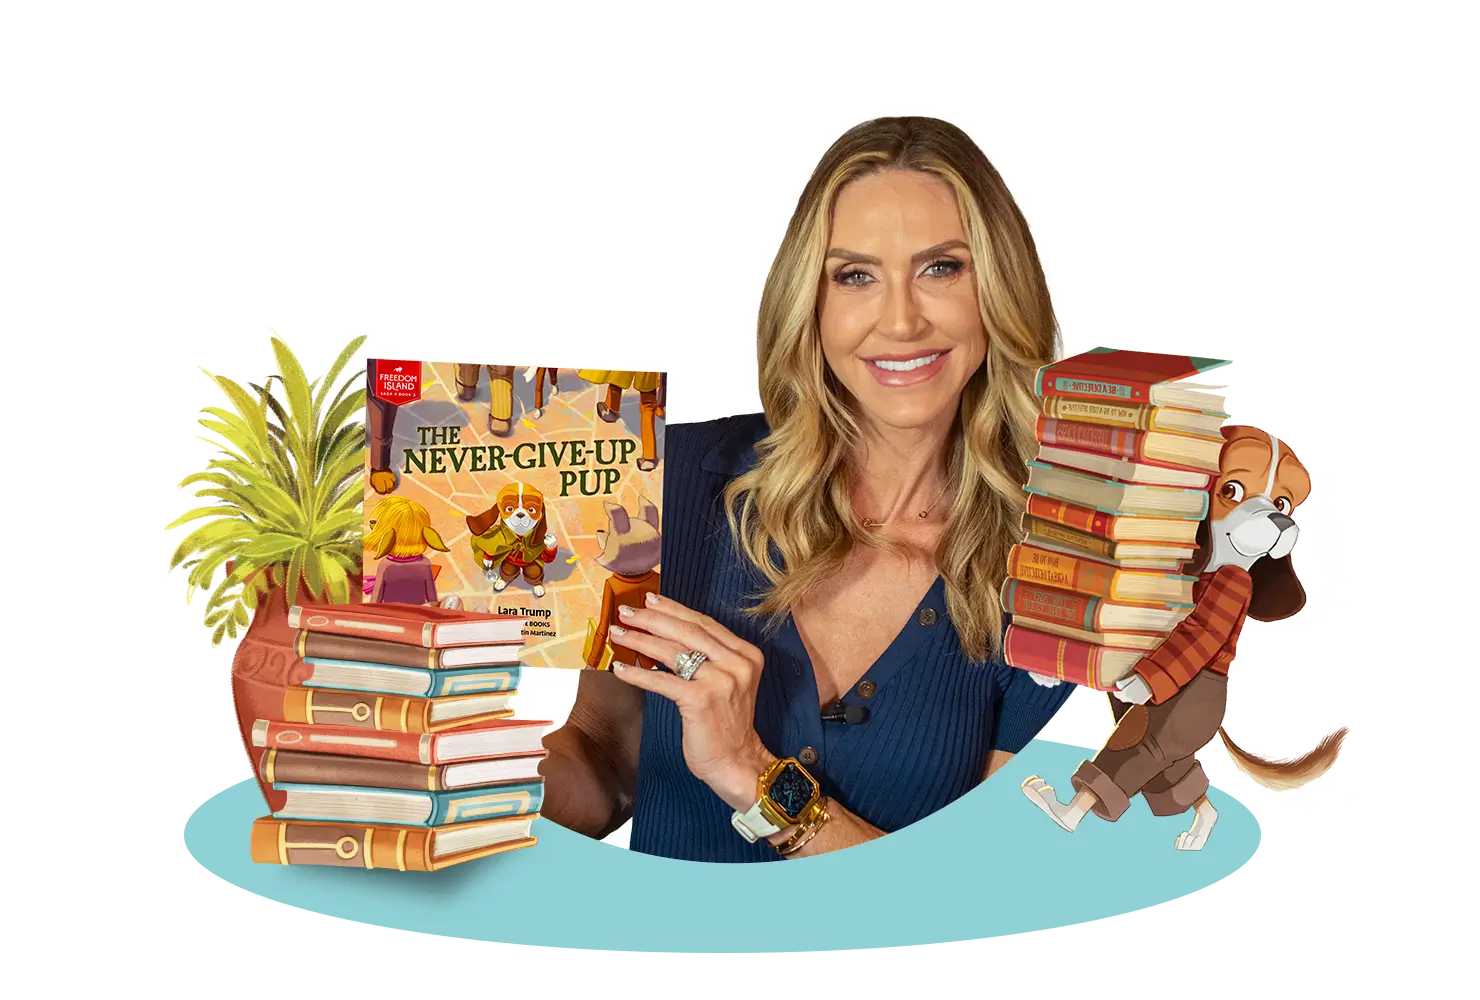 Lara Trump promoting her new children's book, The Never-Give-Up Pup